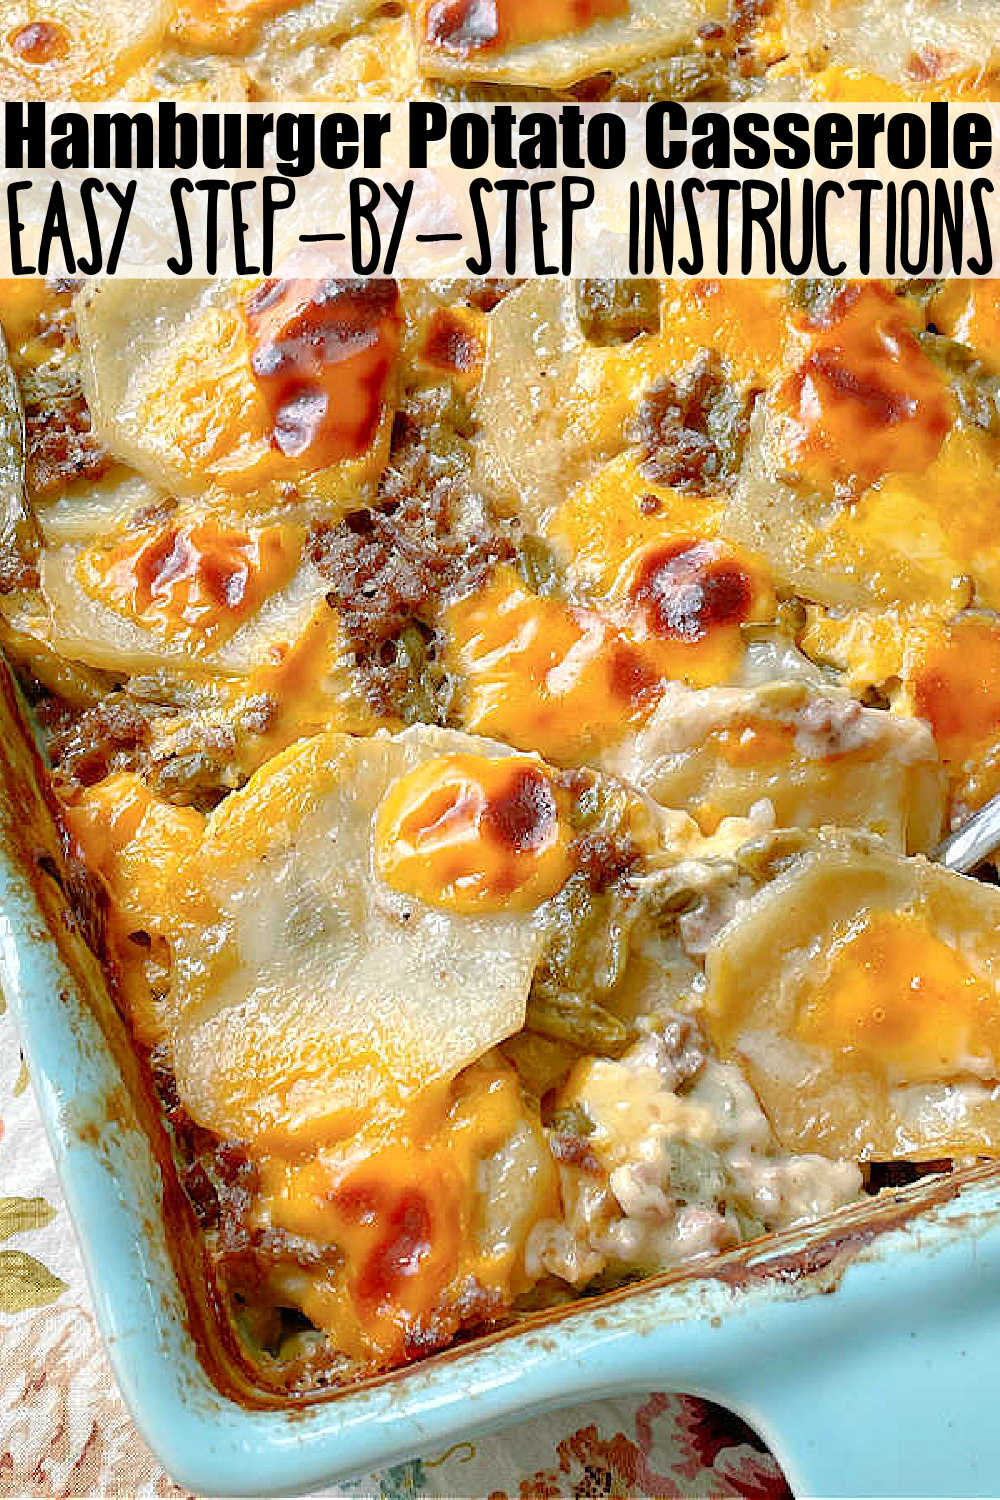 Hamburger Potato Casserole combines potatoes with ground beef and green beans in a velvety cheese sauce. It is pure comfort food.  via @foodtasticmom